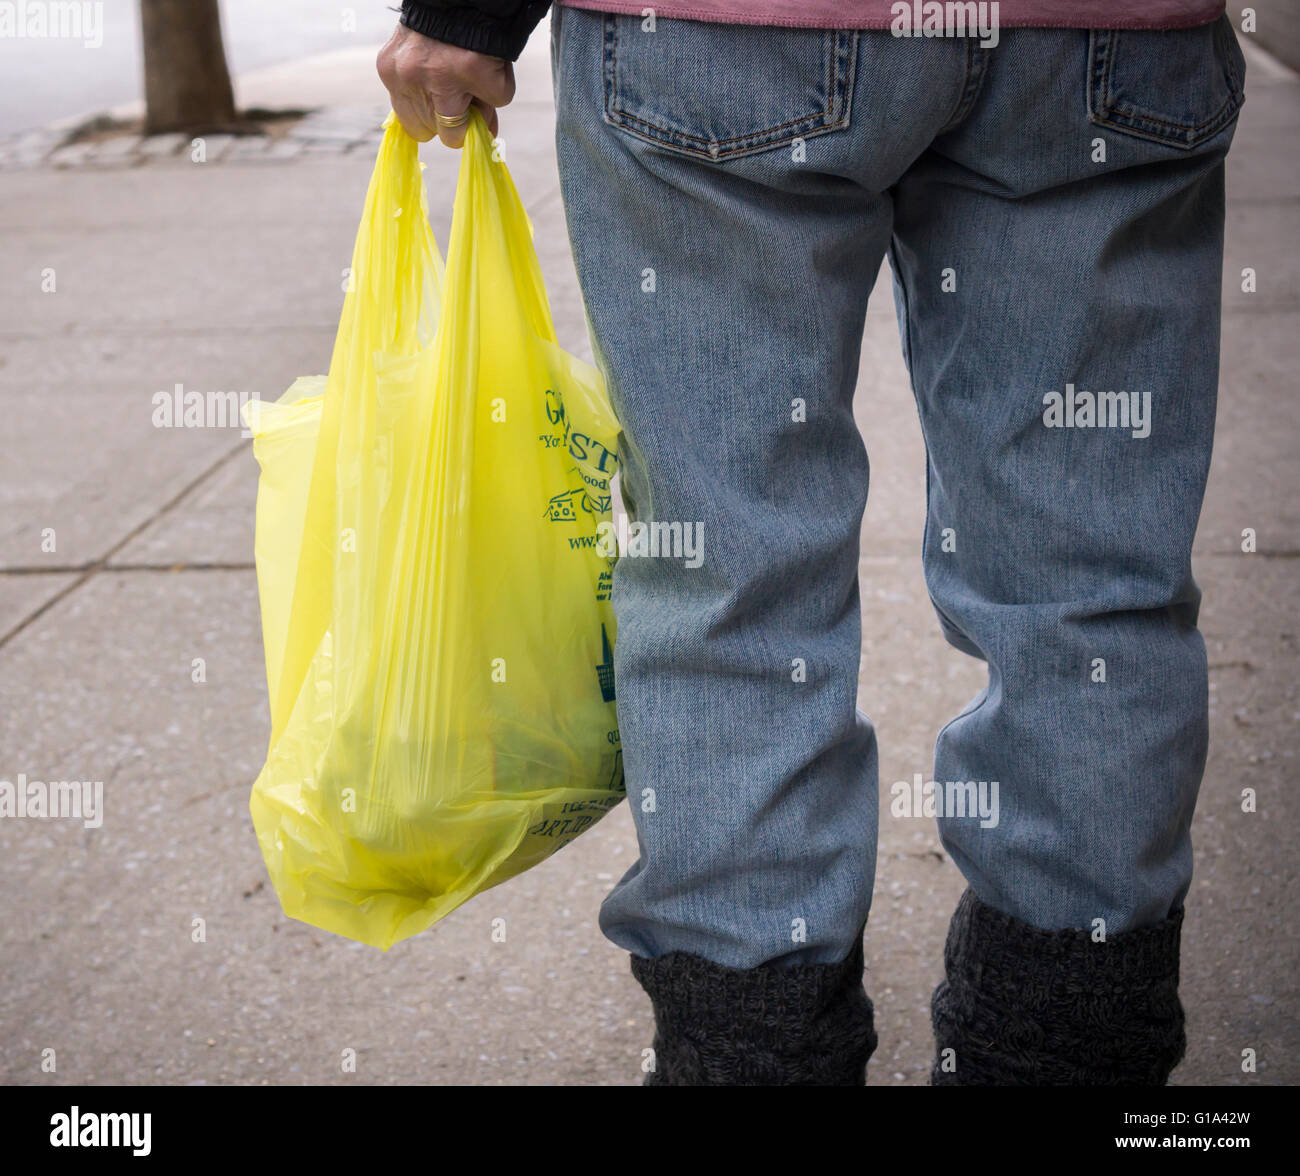 A shopper with her supermarket plastic bag in New York on Thursday, May 5, 2016. The New York City Council approved a bill to charge shoppers 5 cents for every bag used in order to encourage people to reuse or bring their own bags. (© Richard B. Levine) Stock Photo